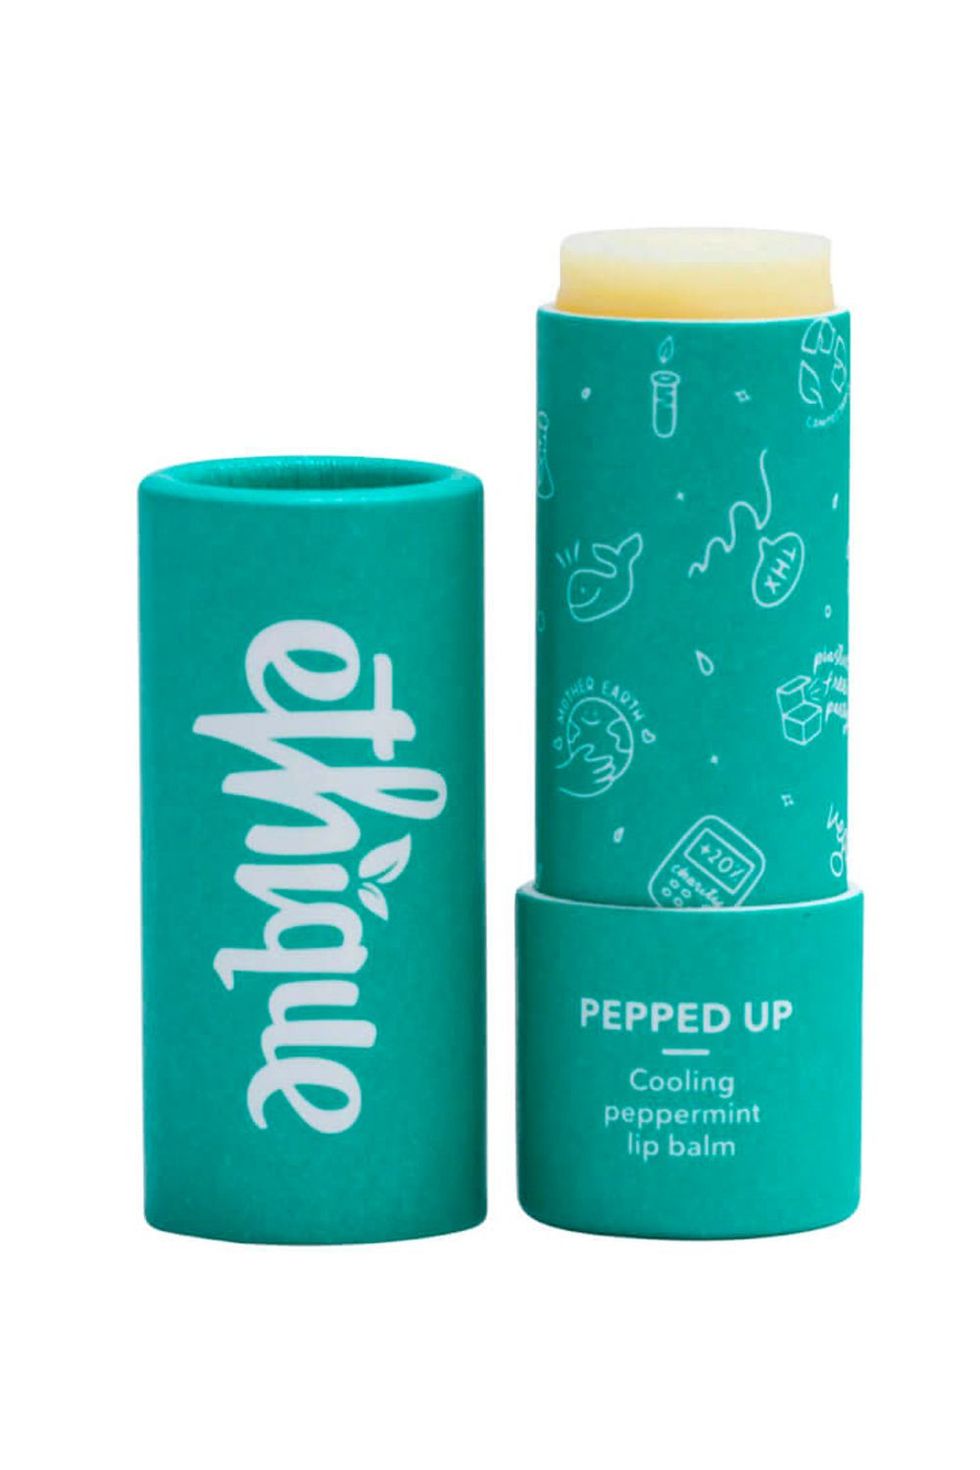 Ethique Pepped Up Cooling Peppermint Lip Balm